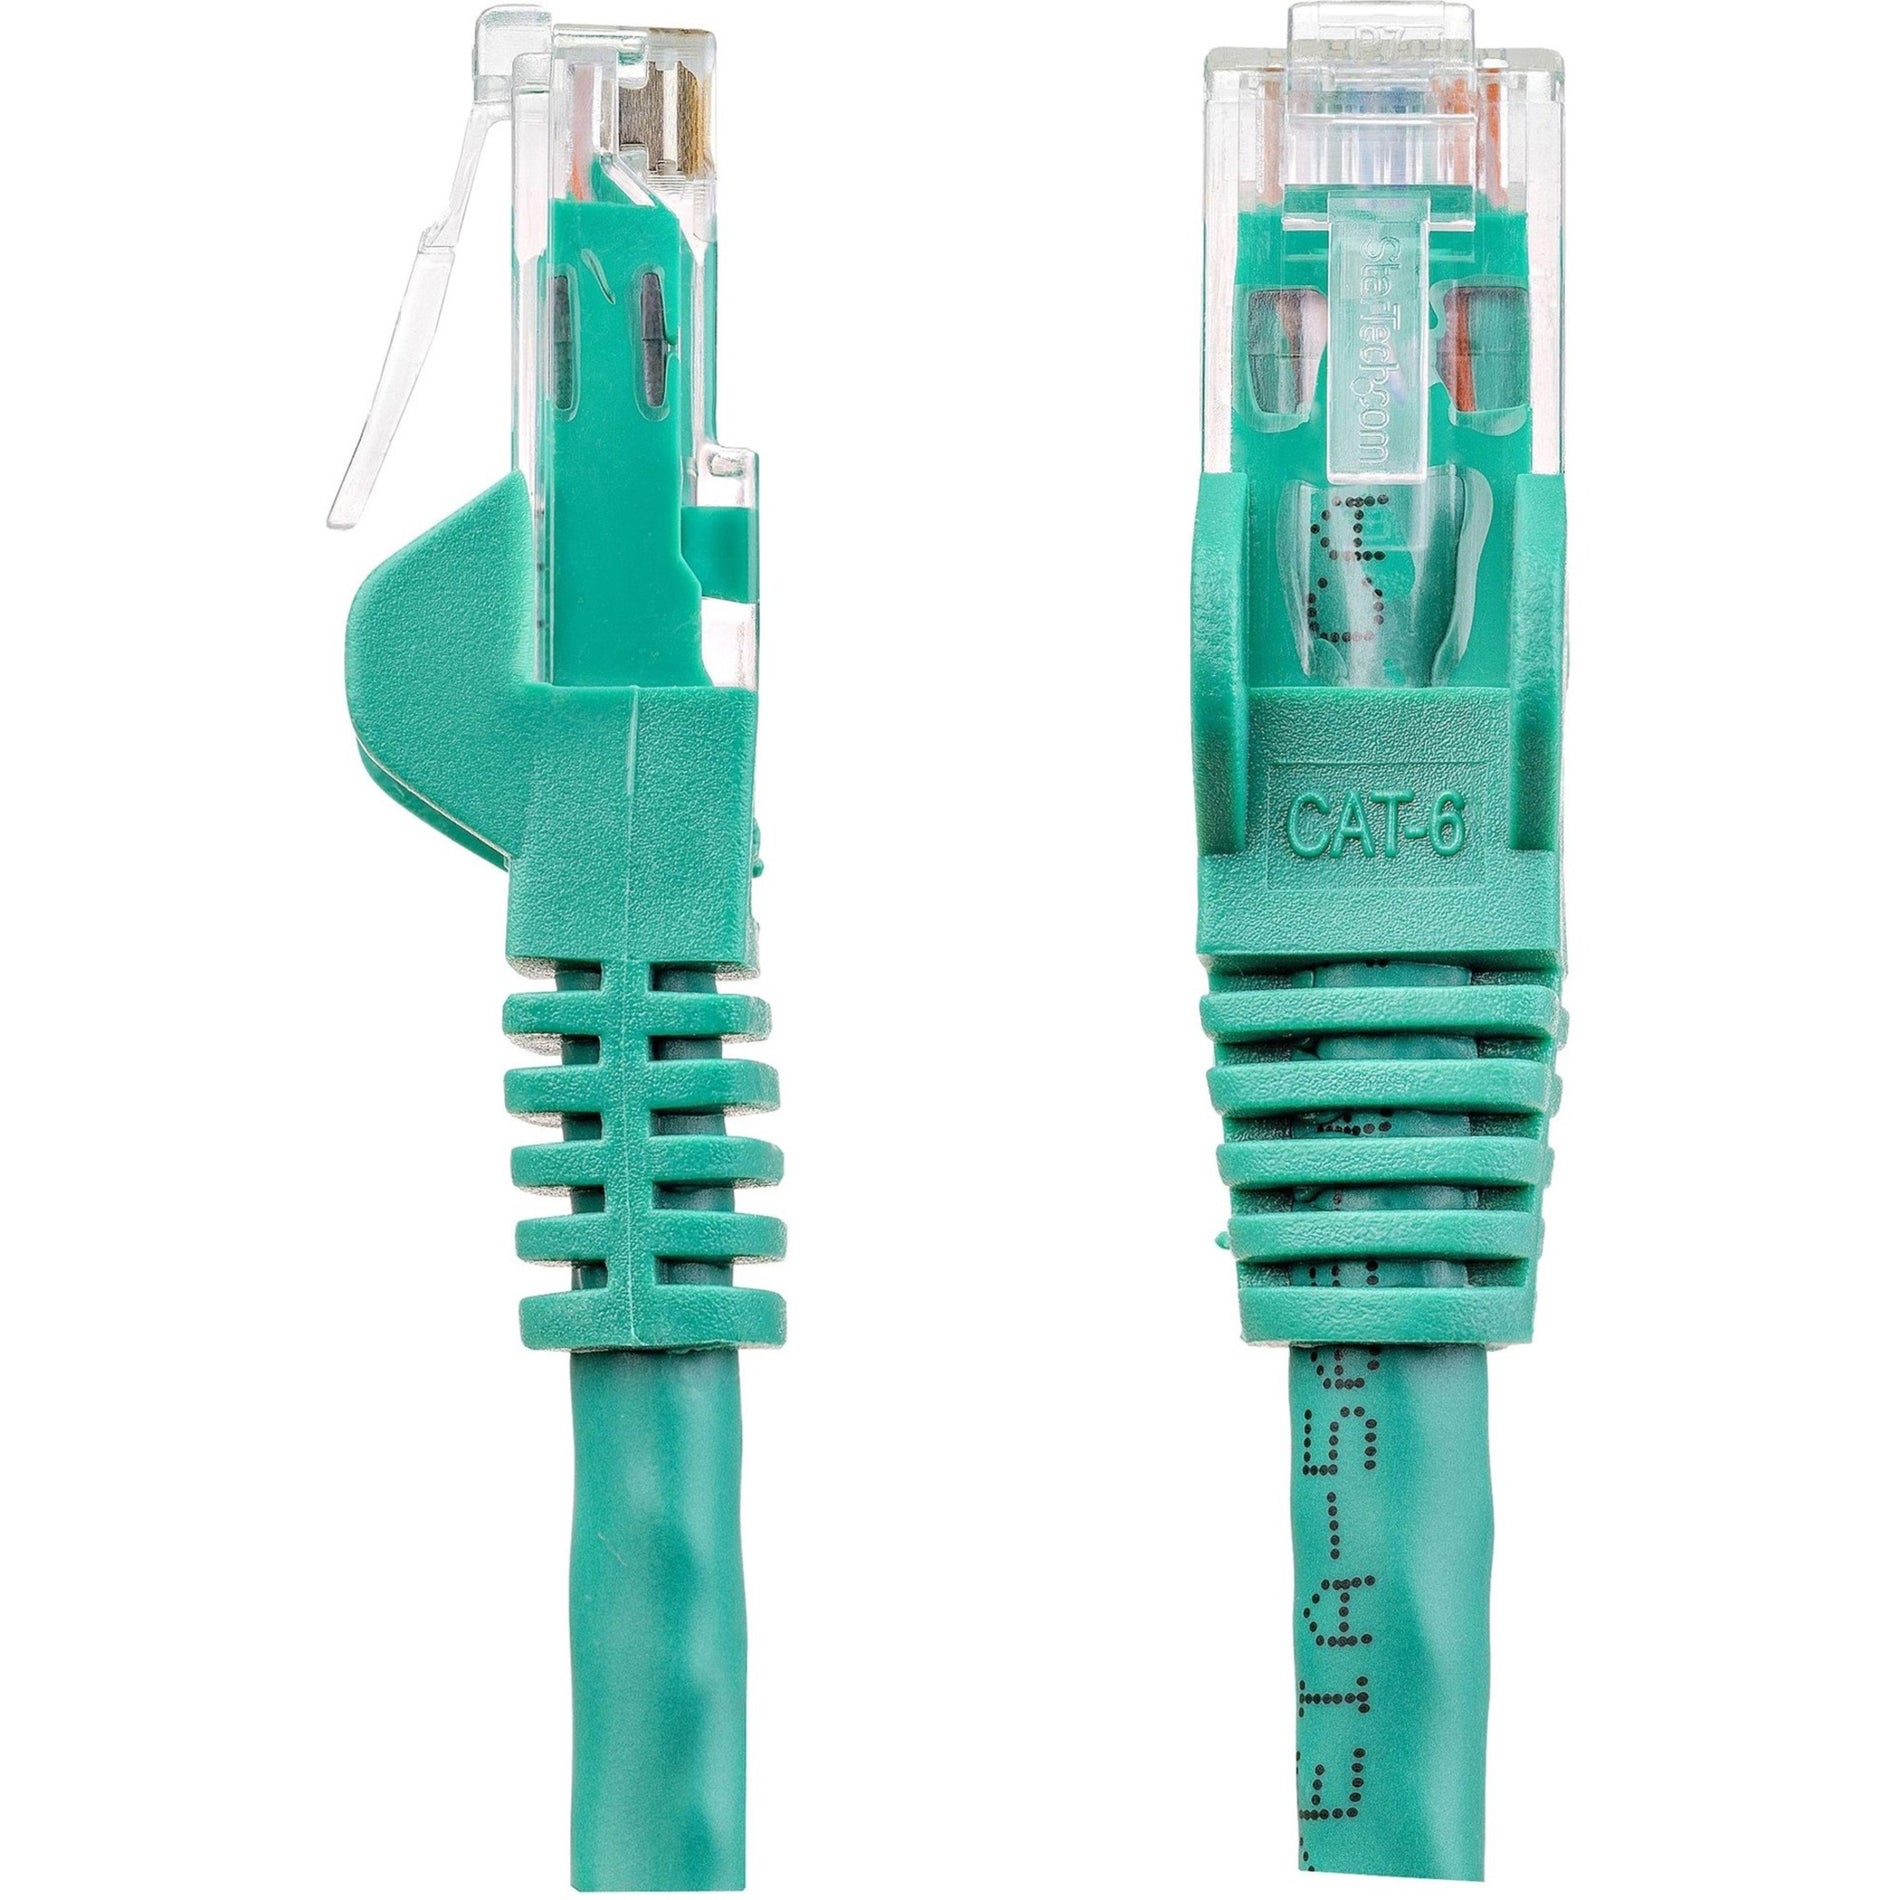 StarTech.com N6PATCH6INGN Cat6 Patch Cable, 6in Green, Short Ethernet Cable